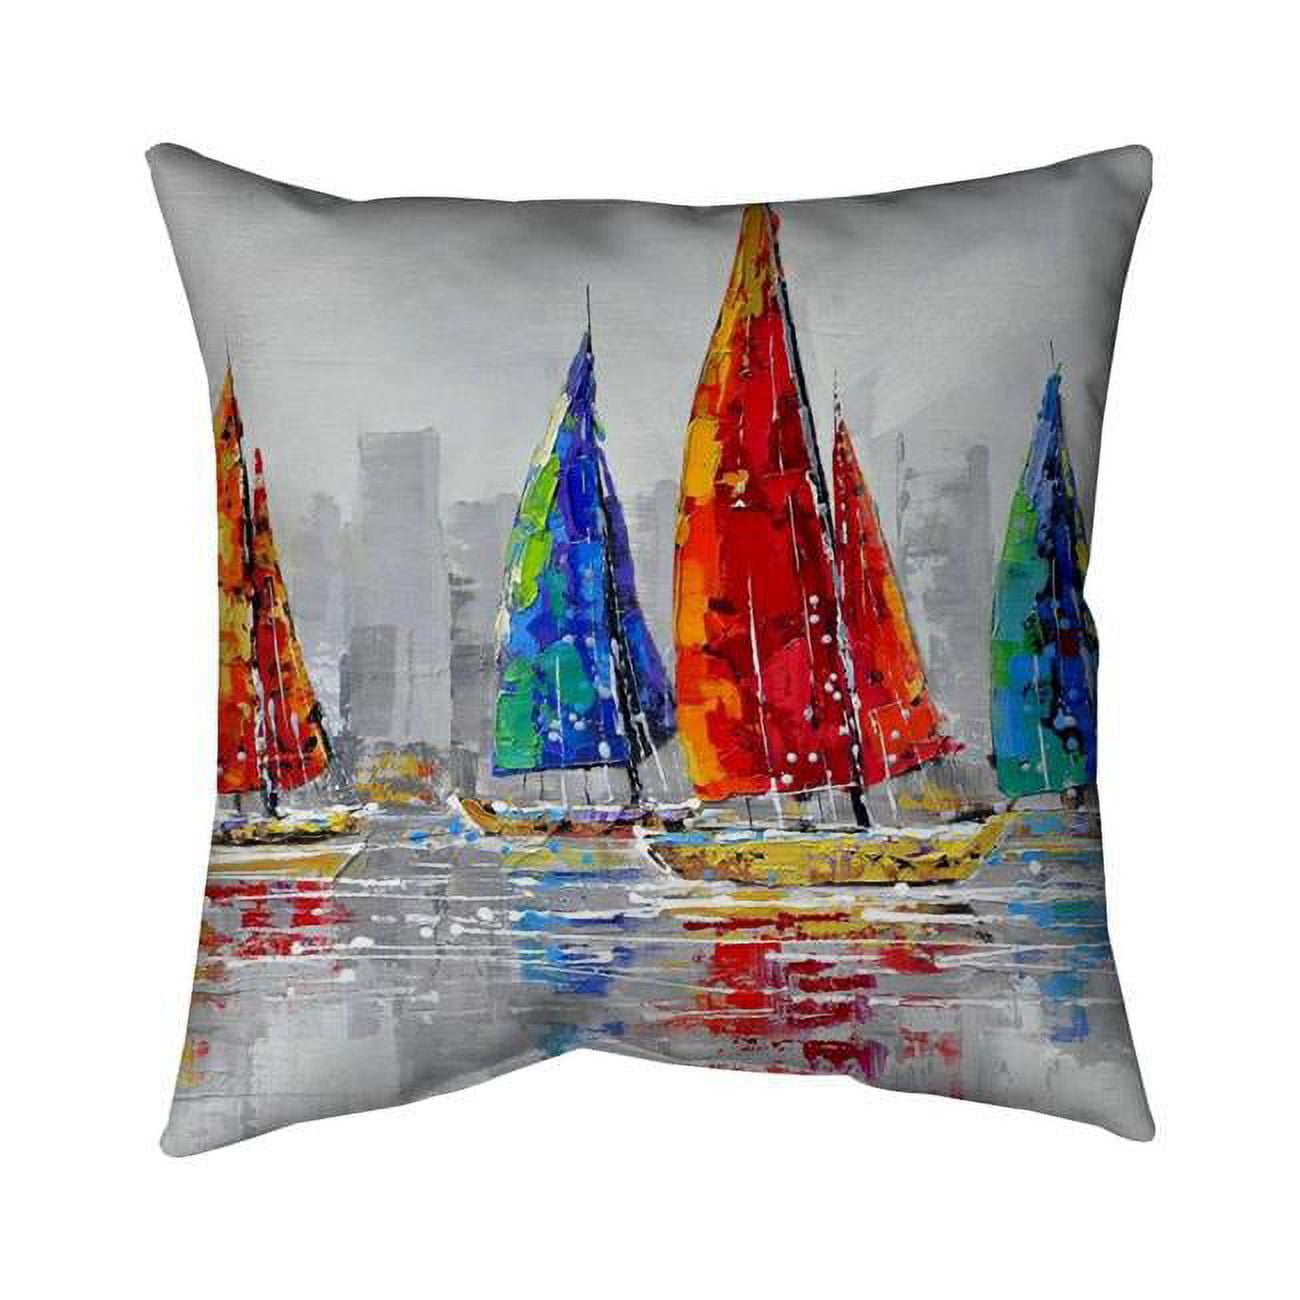 Begin Home Decor 5541-1818-CO6 18 x 18 in. Colorful Boats Near A Grey City-Double Sided Print Indoor Pillow